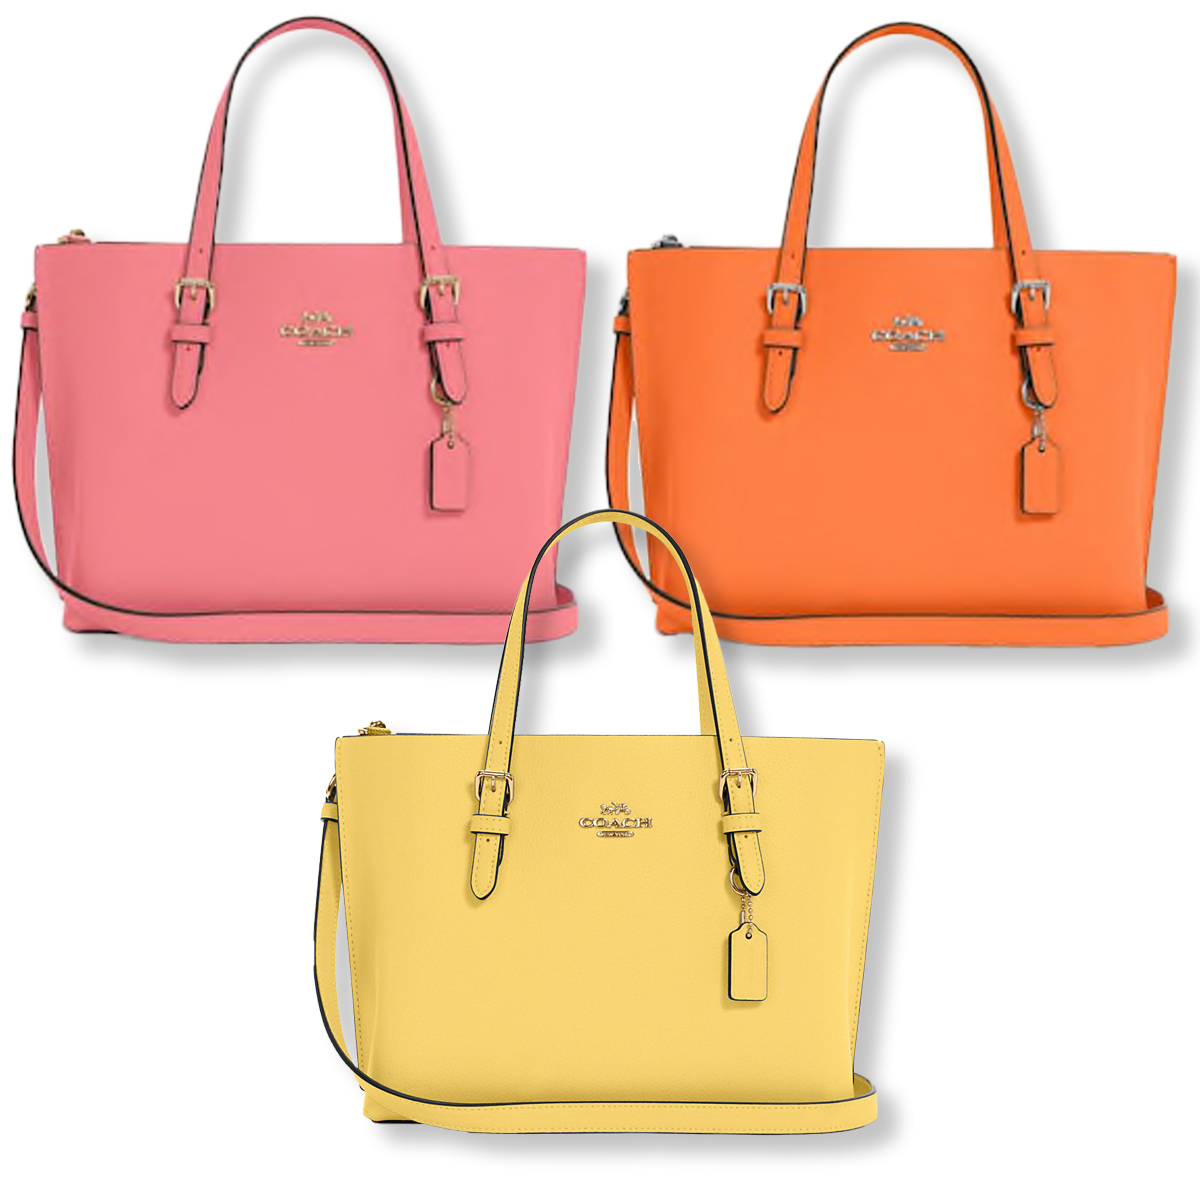 Coach Outlet Sale: Save 70% Off Coach Reserve Styles